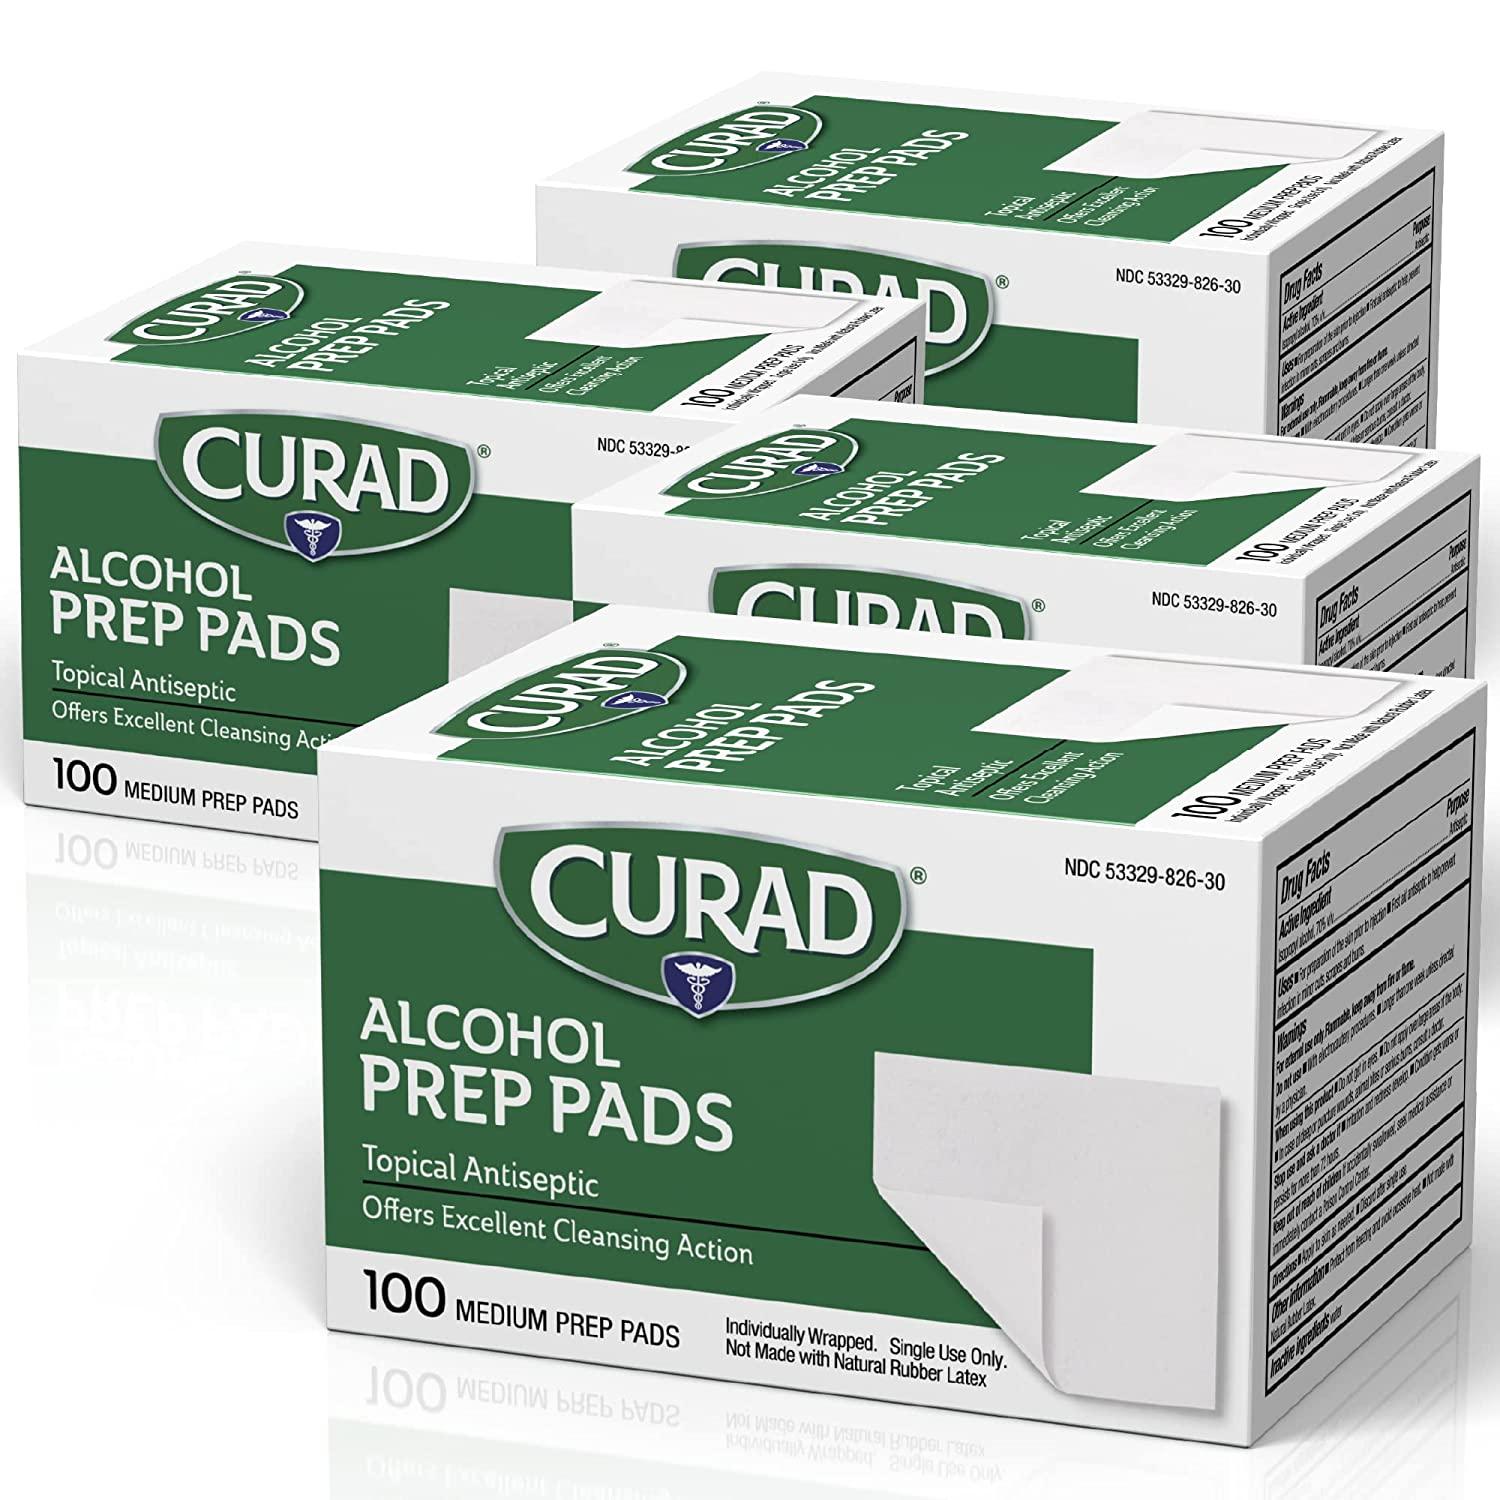 Curad Alcohol Prep 2-Ply Pads 400 Sheets for $4.49 Shipped